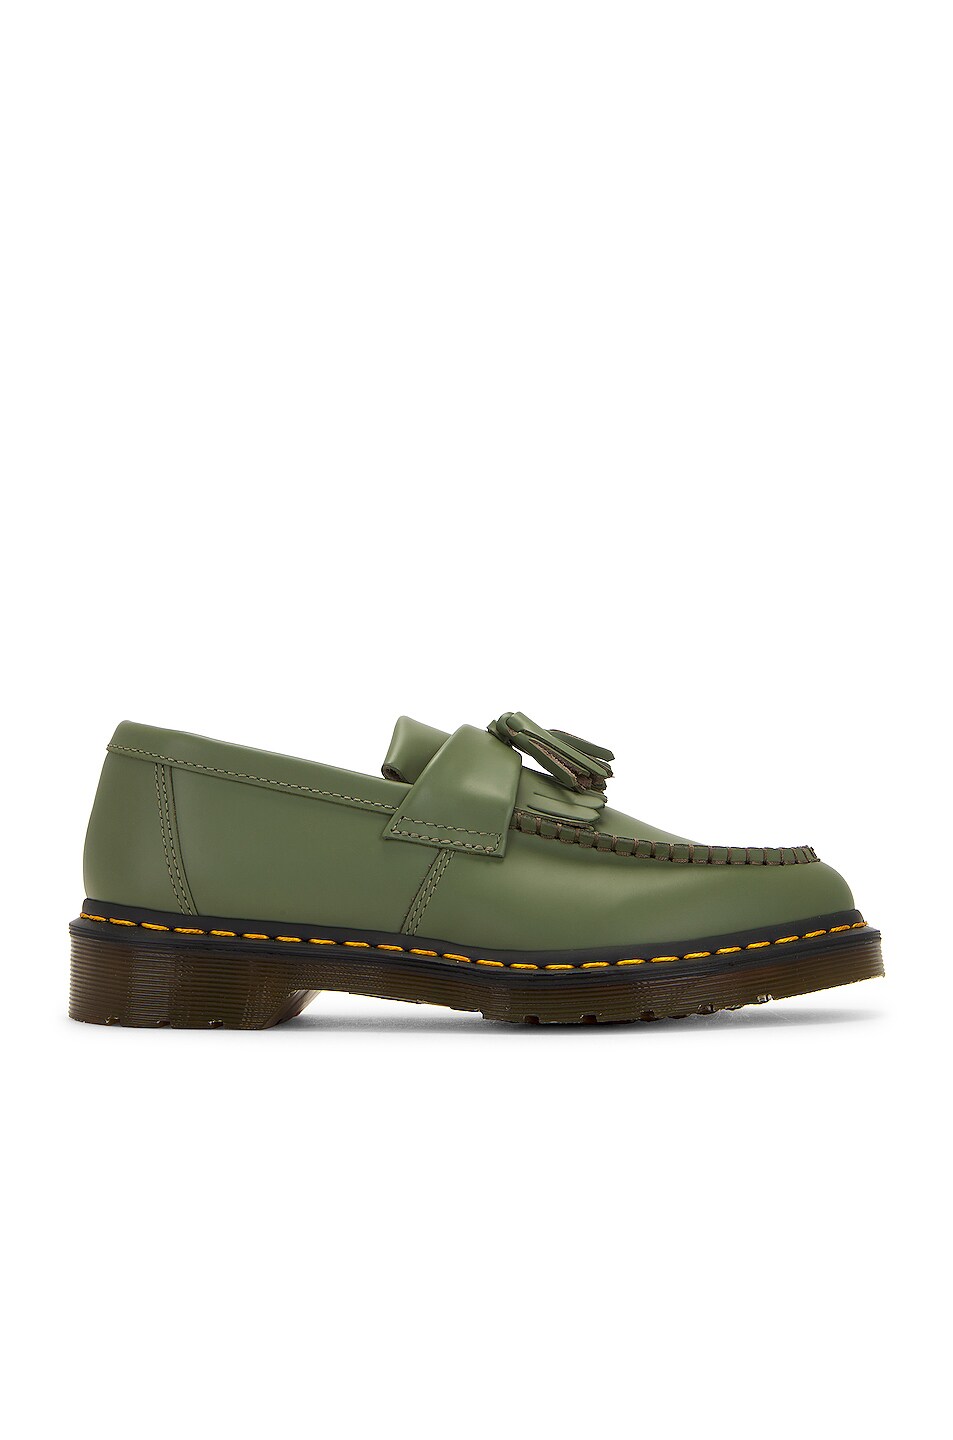 Image 1 of Dr. Martens Adrian Yellow Stitch Smooth Loafer in Khaki Green